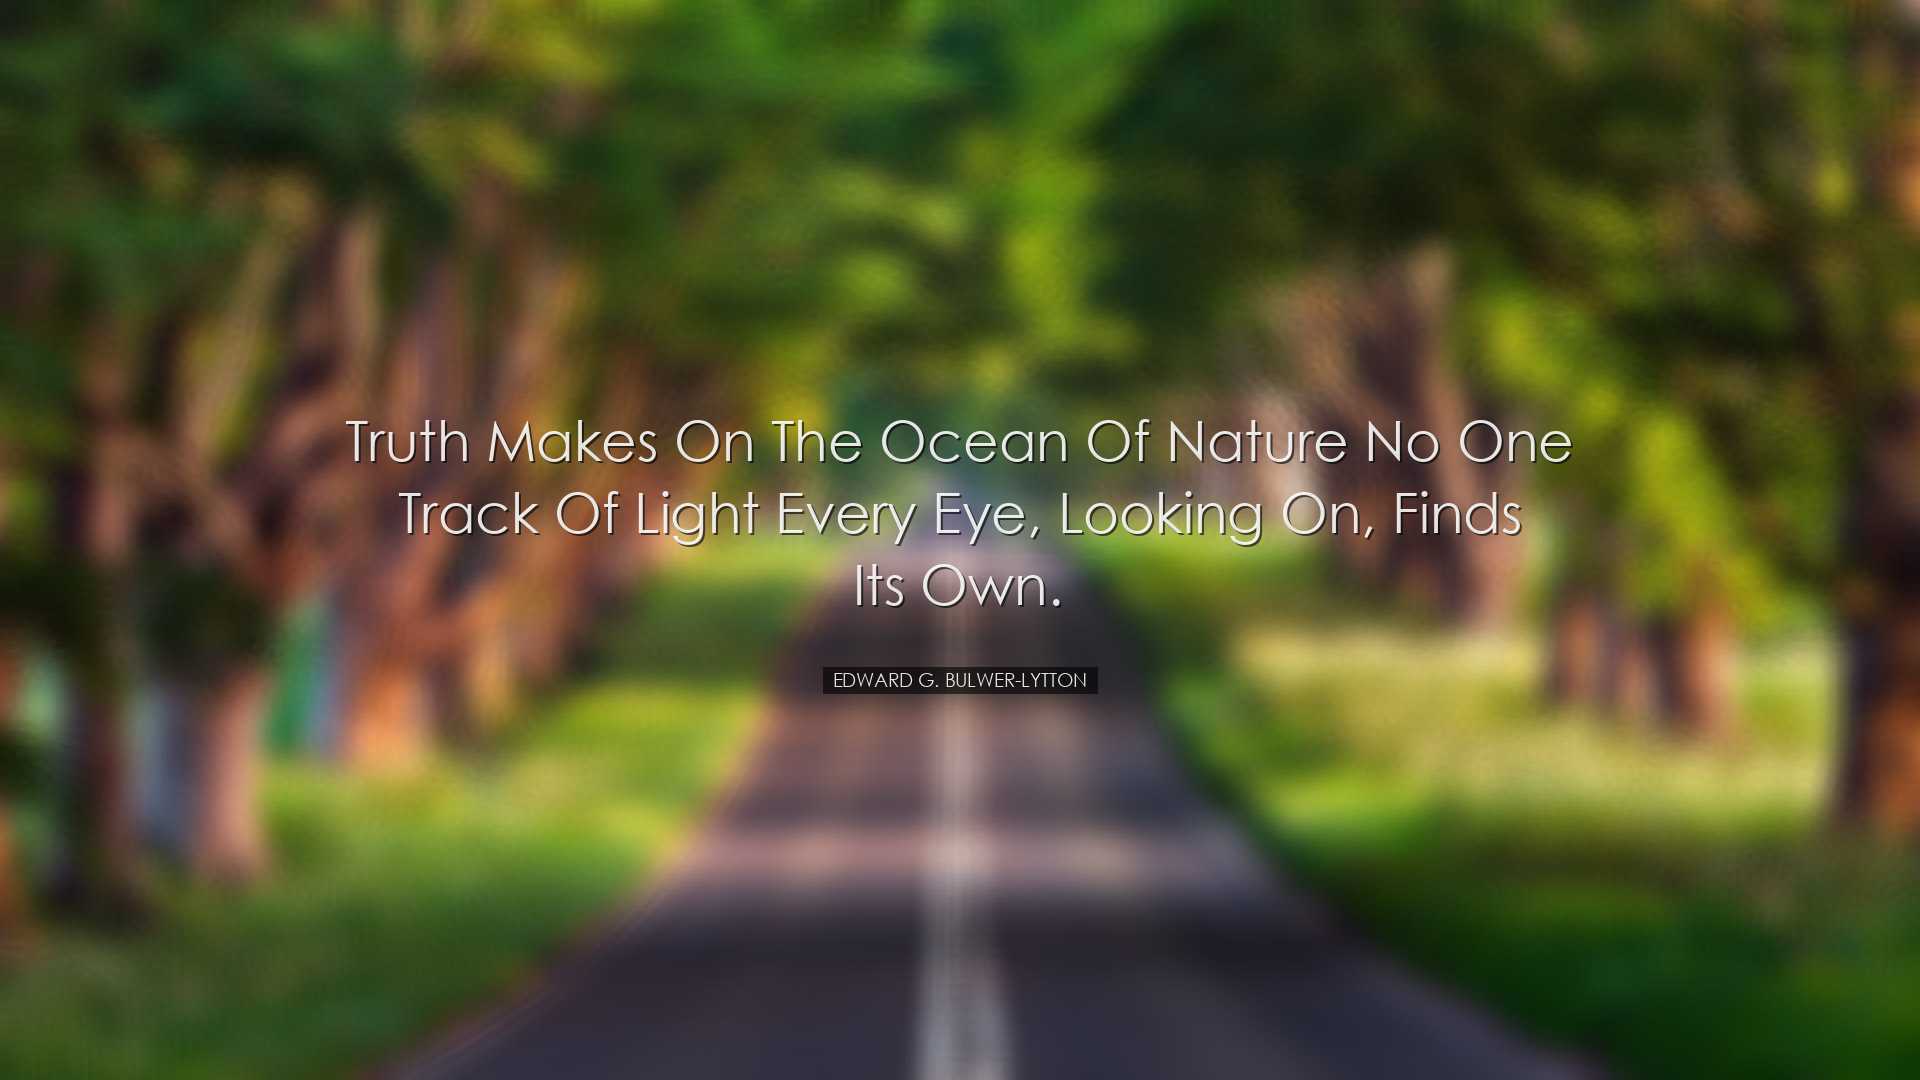 Truth makes on the ocean of nature no one track of light every eye